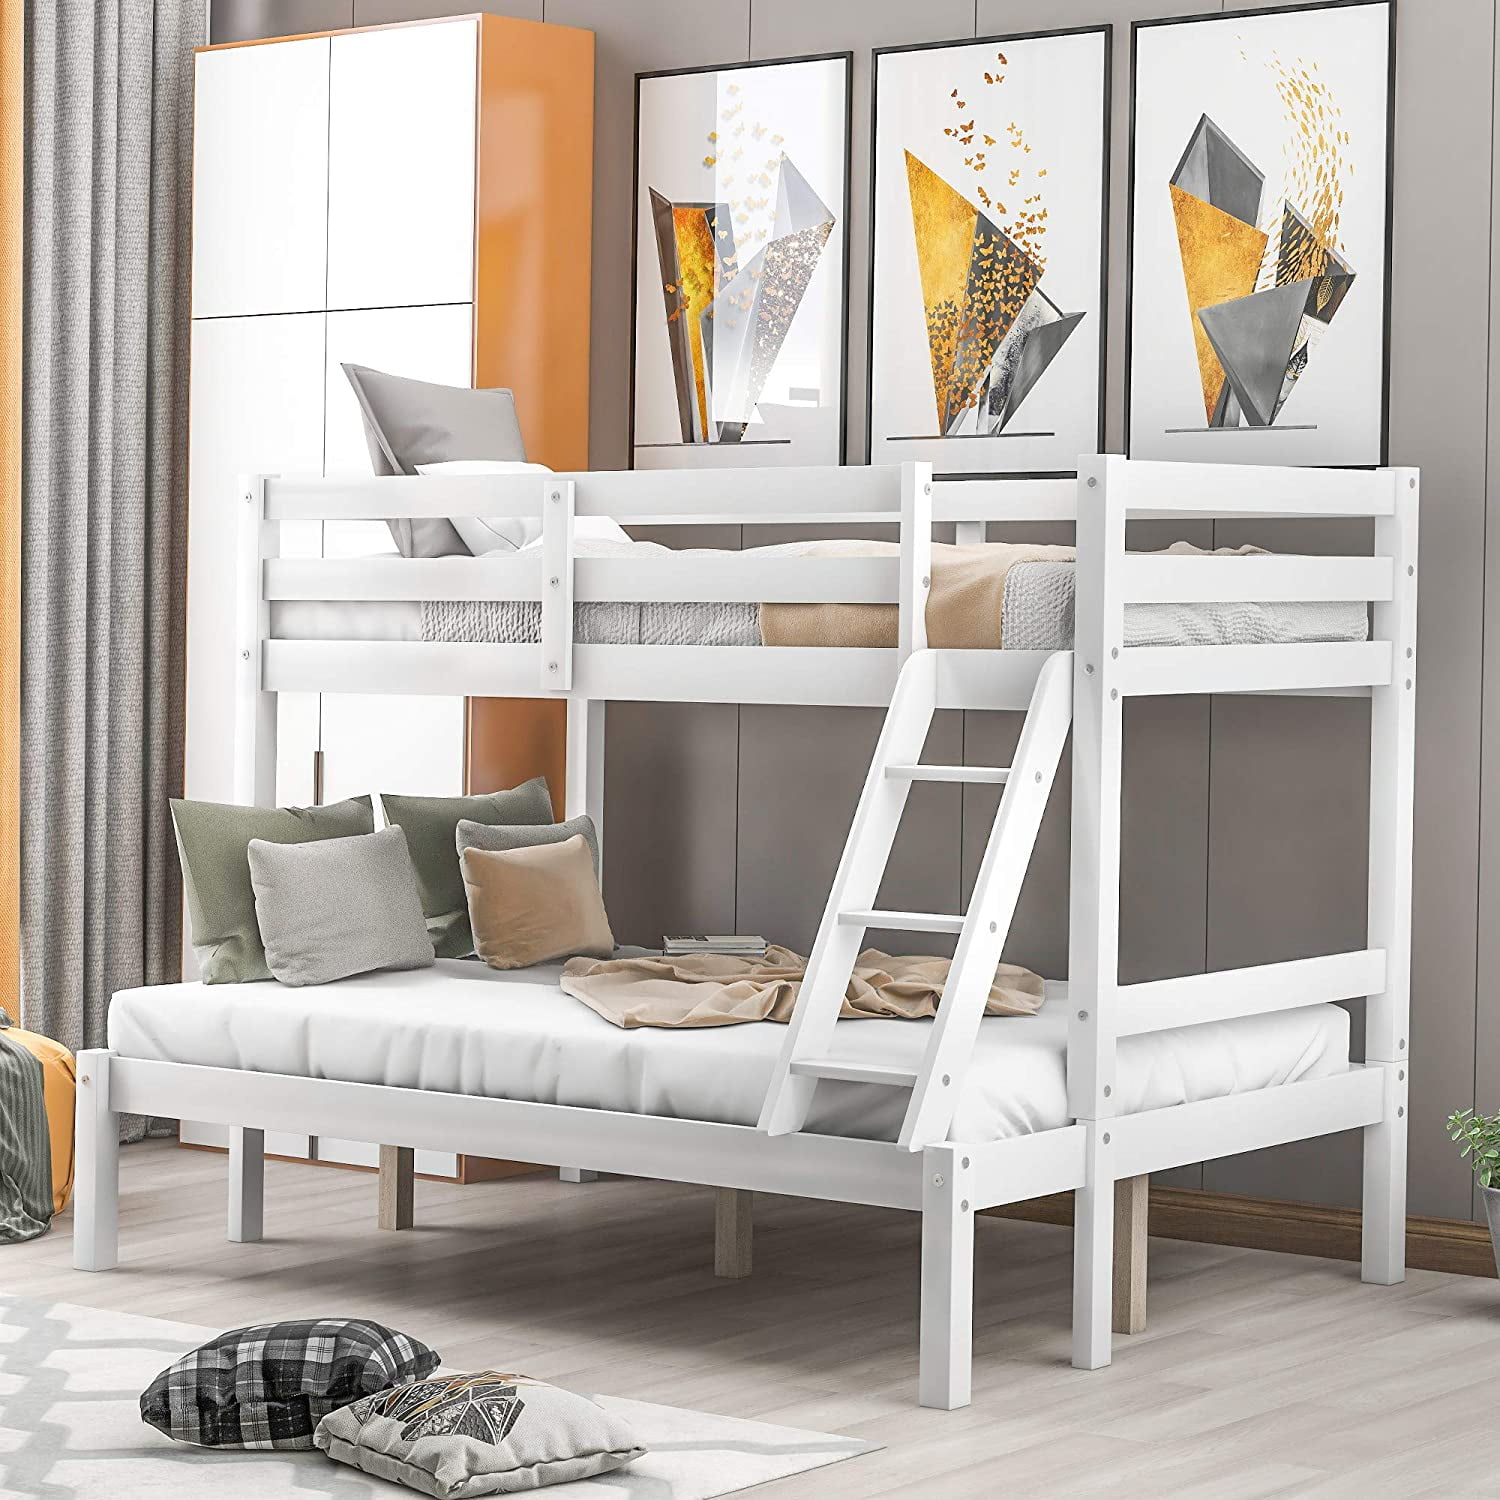 Churanty Twin Over Full Bunk Bed Solid, Natural Wood Bunk Beds Twin Over Full